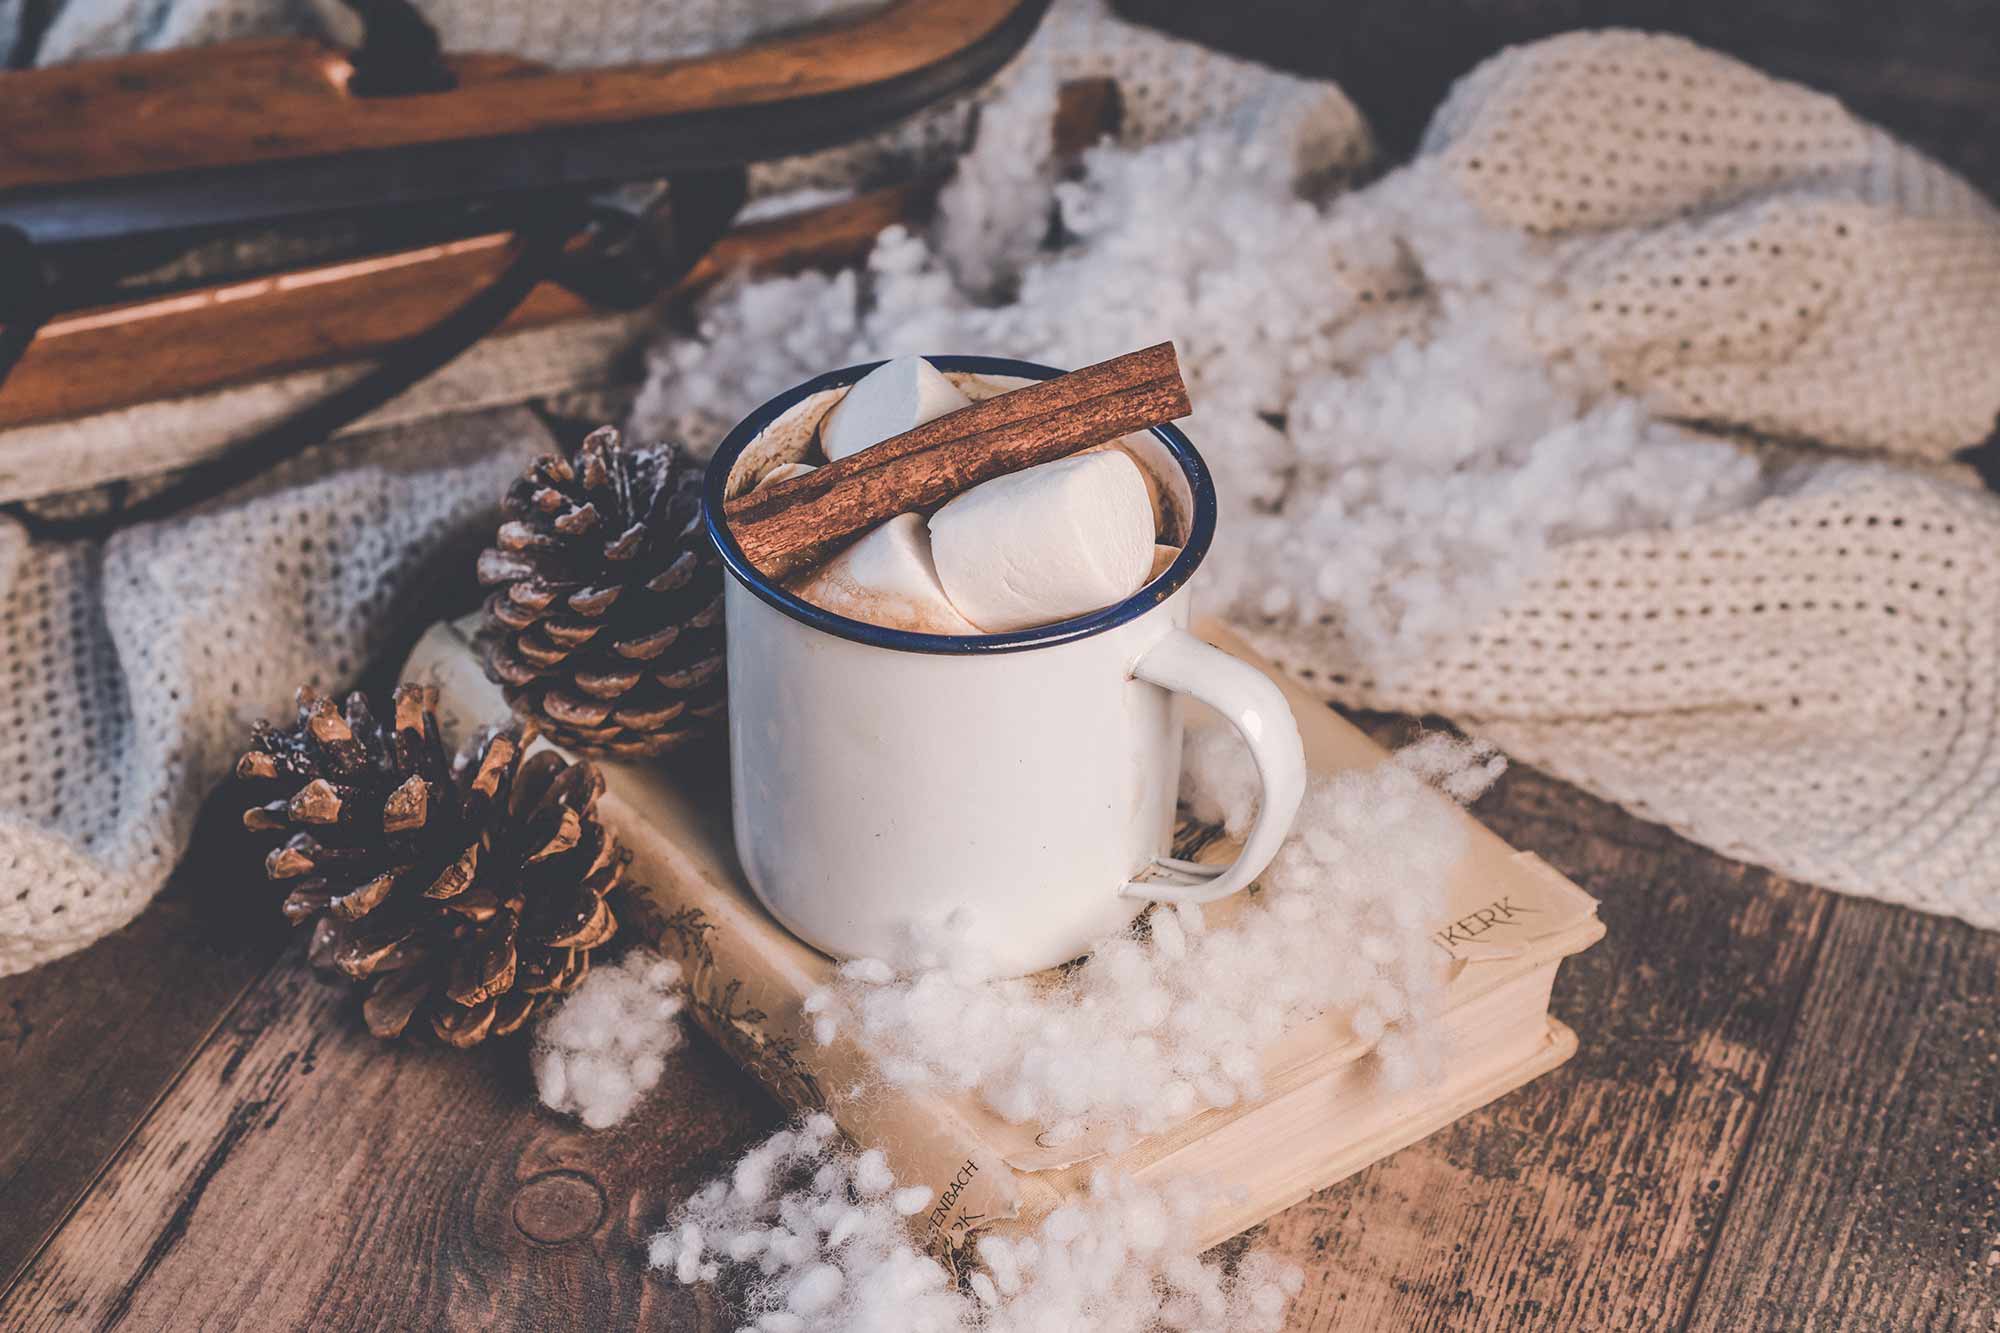 Design for Conscious Living - Go Green for the Holidays - White Ceramic Mug - Photo by Ylanite Koppens from Pexels